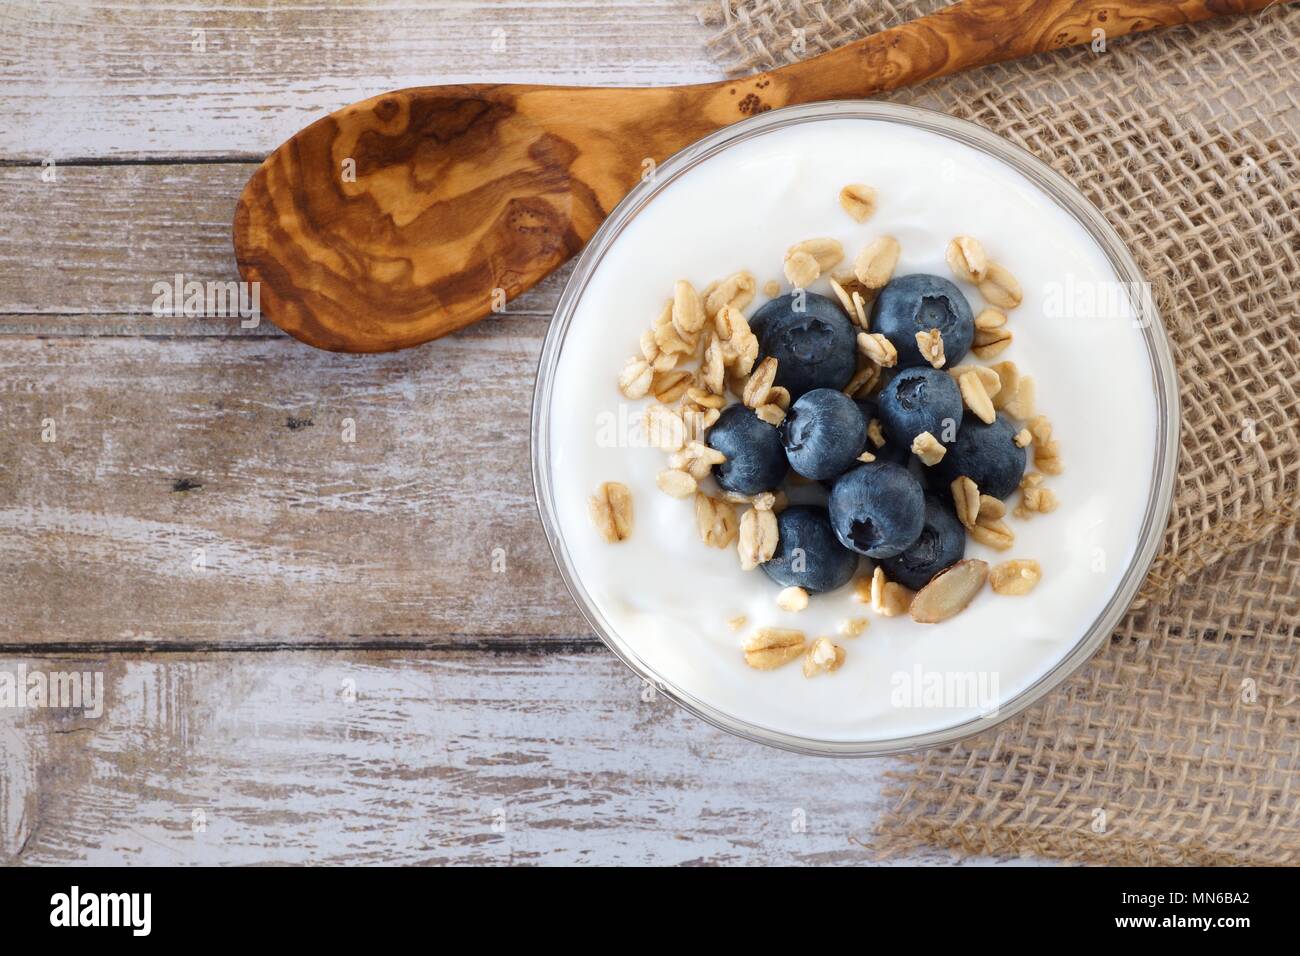 Yogurt with sweet blueberries and granola, above view on rustic wood Stock Photo